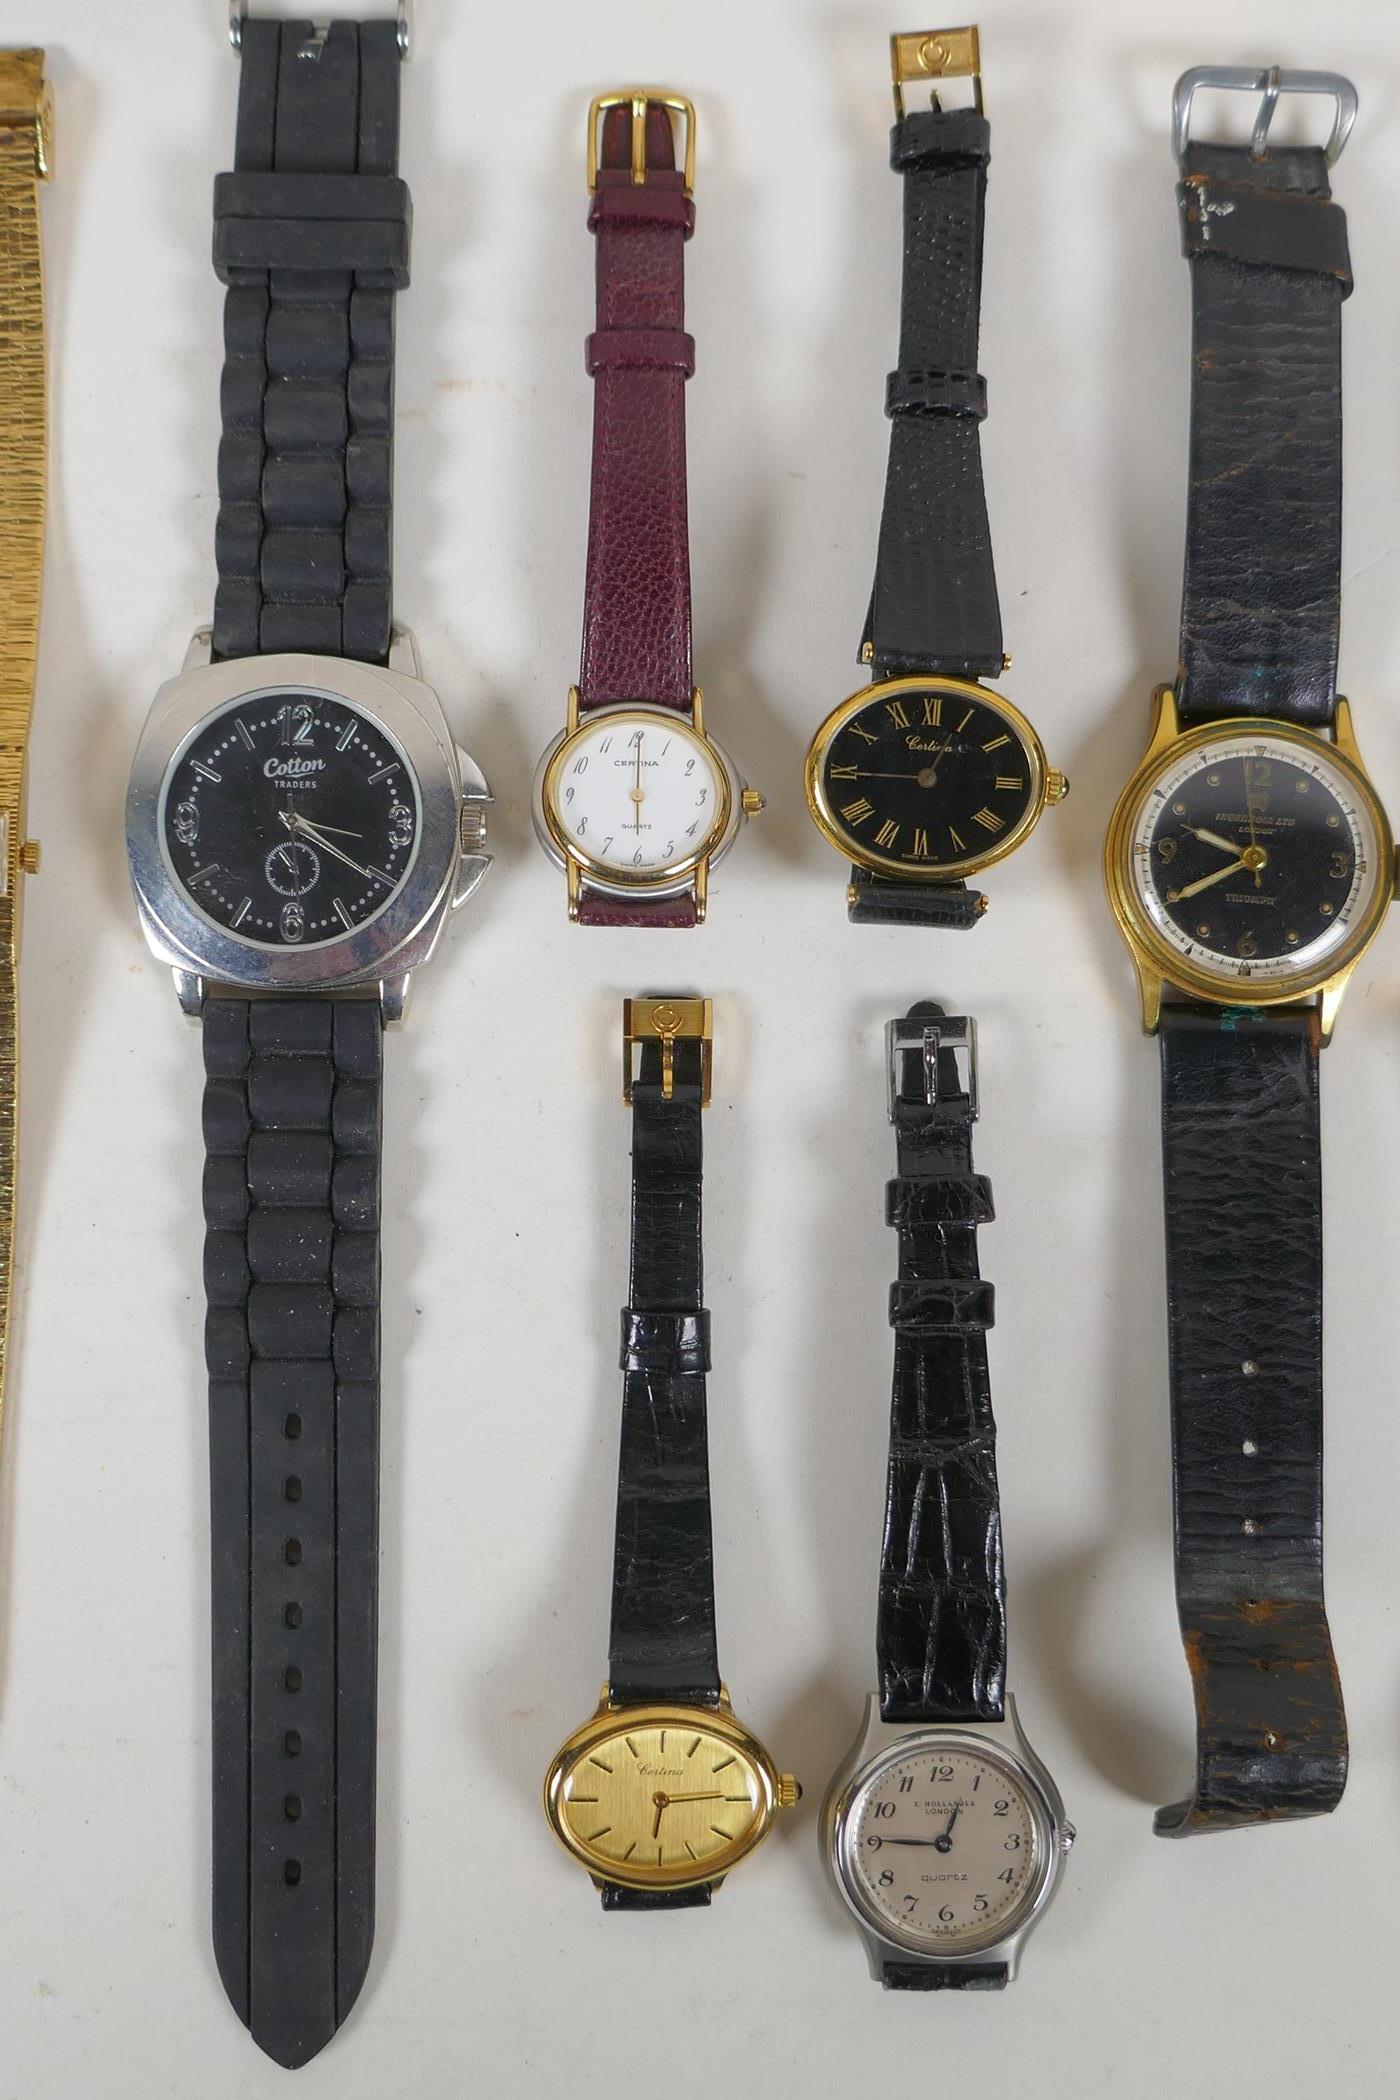 A collection of vintage lady's and gentleman's watches including Certina, Accurist, Avia, - Image 6 of 7